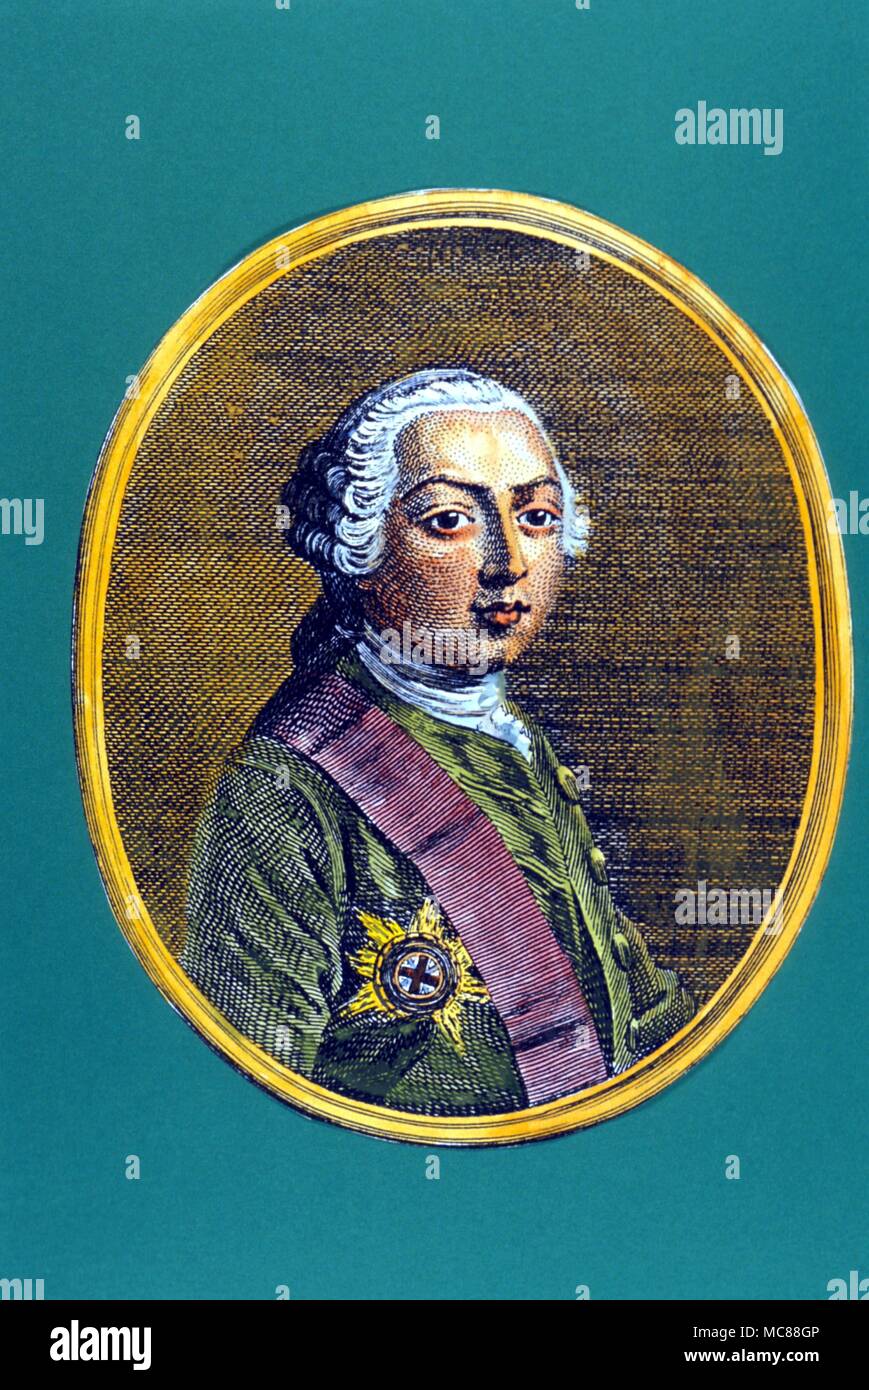 HISTORY - BRITISH - GEORGE III Portrait of George III - hand coloured engraving by Grignion from the 1753 edition of Smollett's 'History of England'. Stock Photo